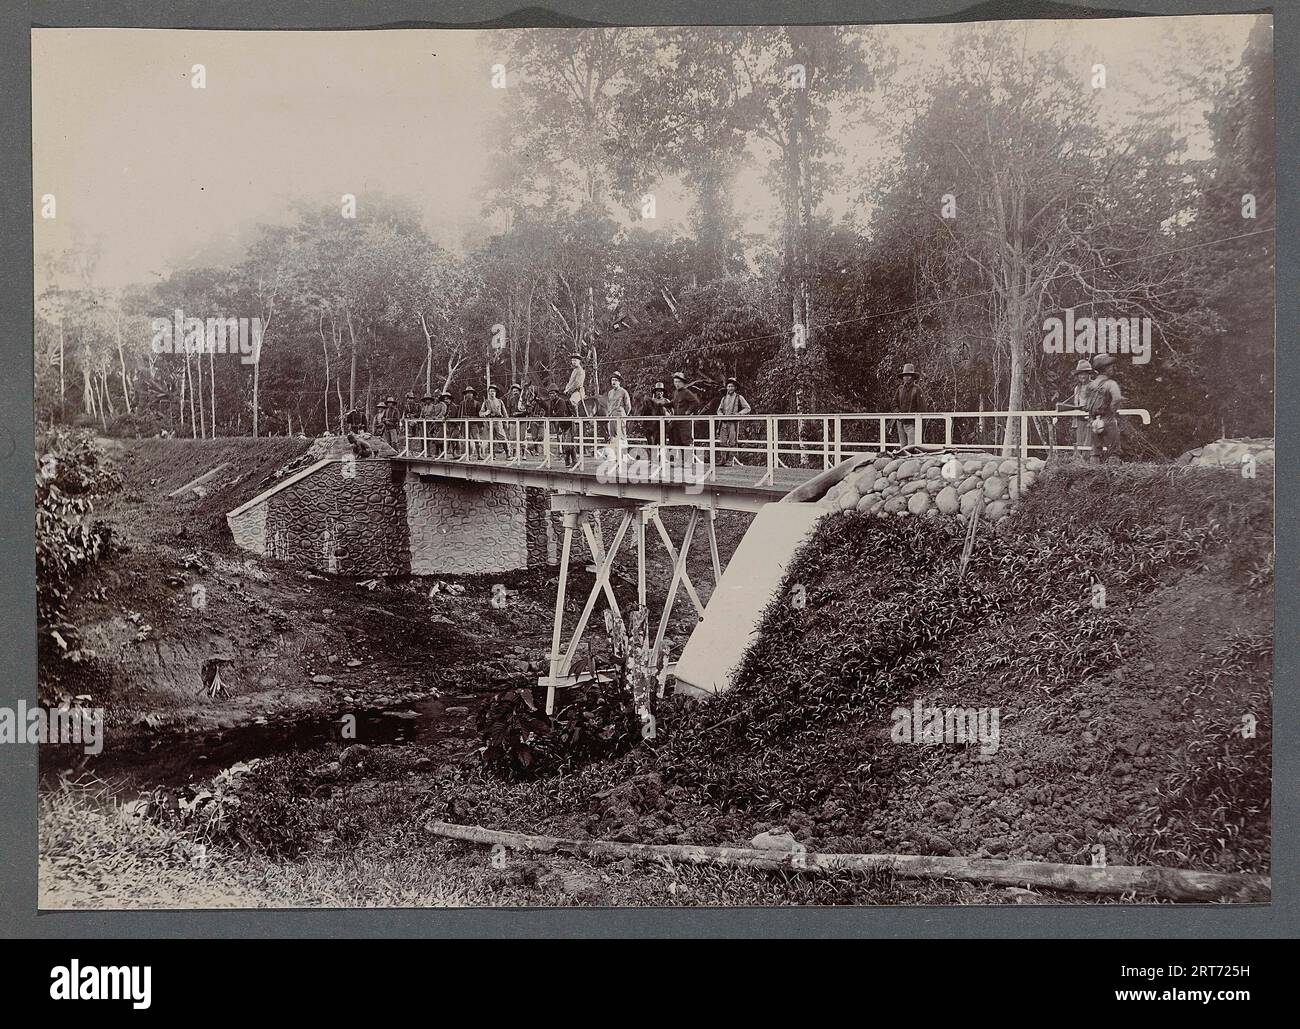 Colonial Dutch Empire in Indonesia, 1900,  Bridge over the river Alue Teungoh, anonymous, 1903 - 1913 Stock Photo